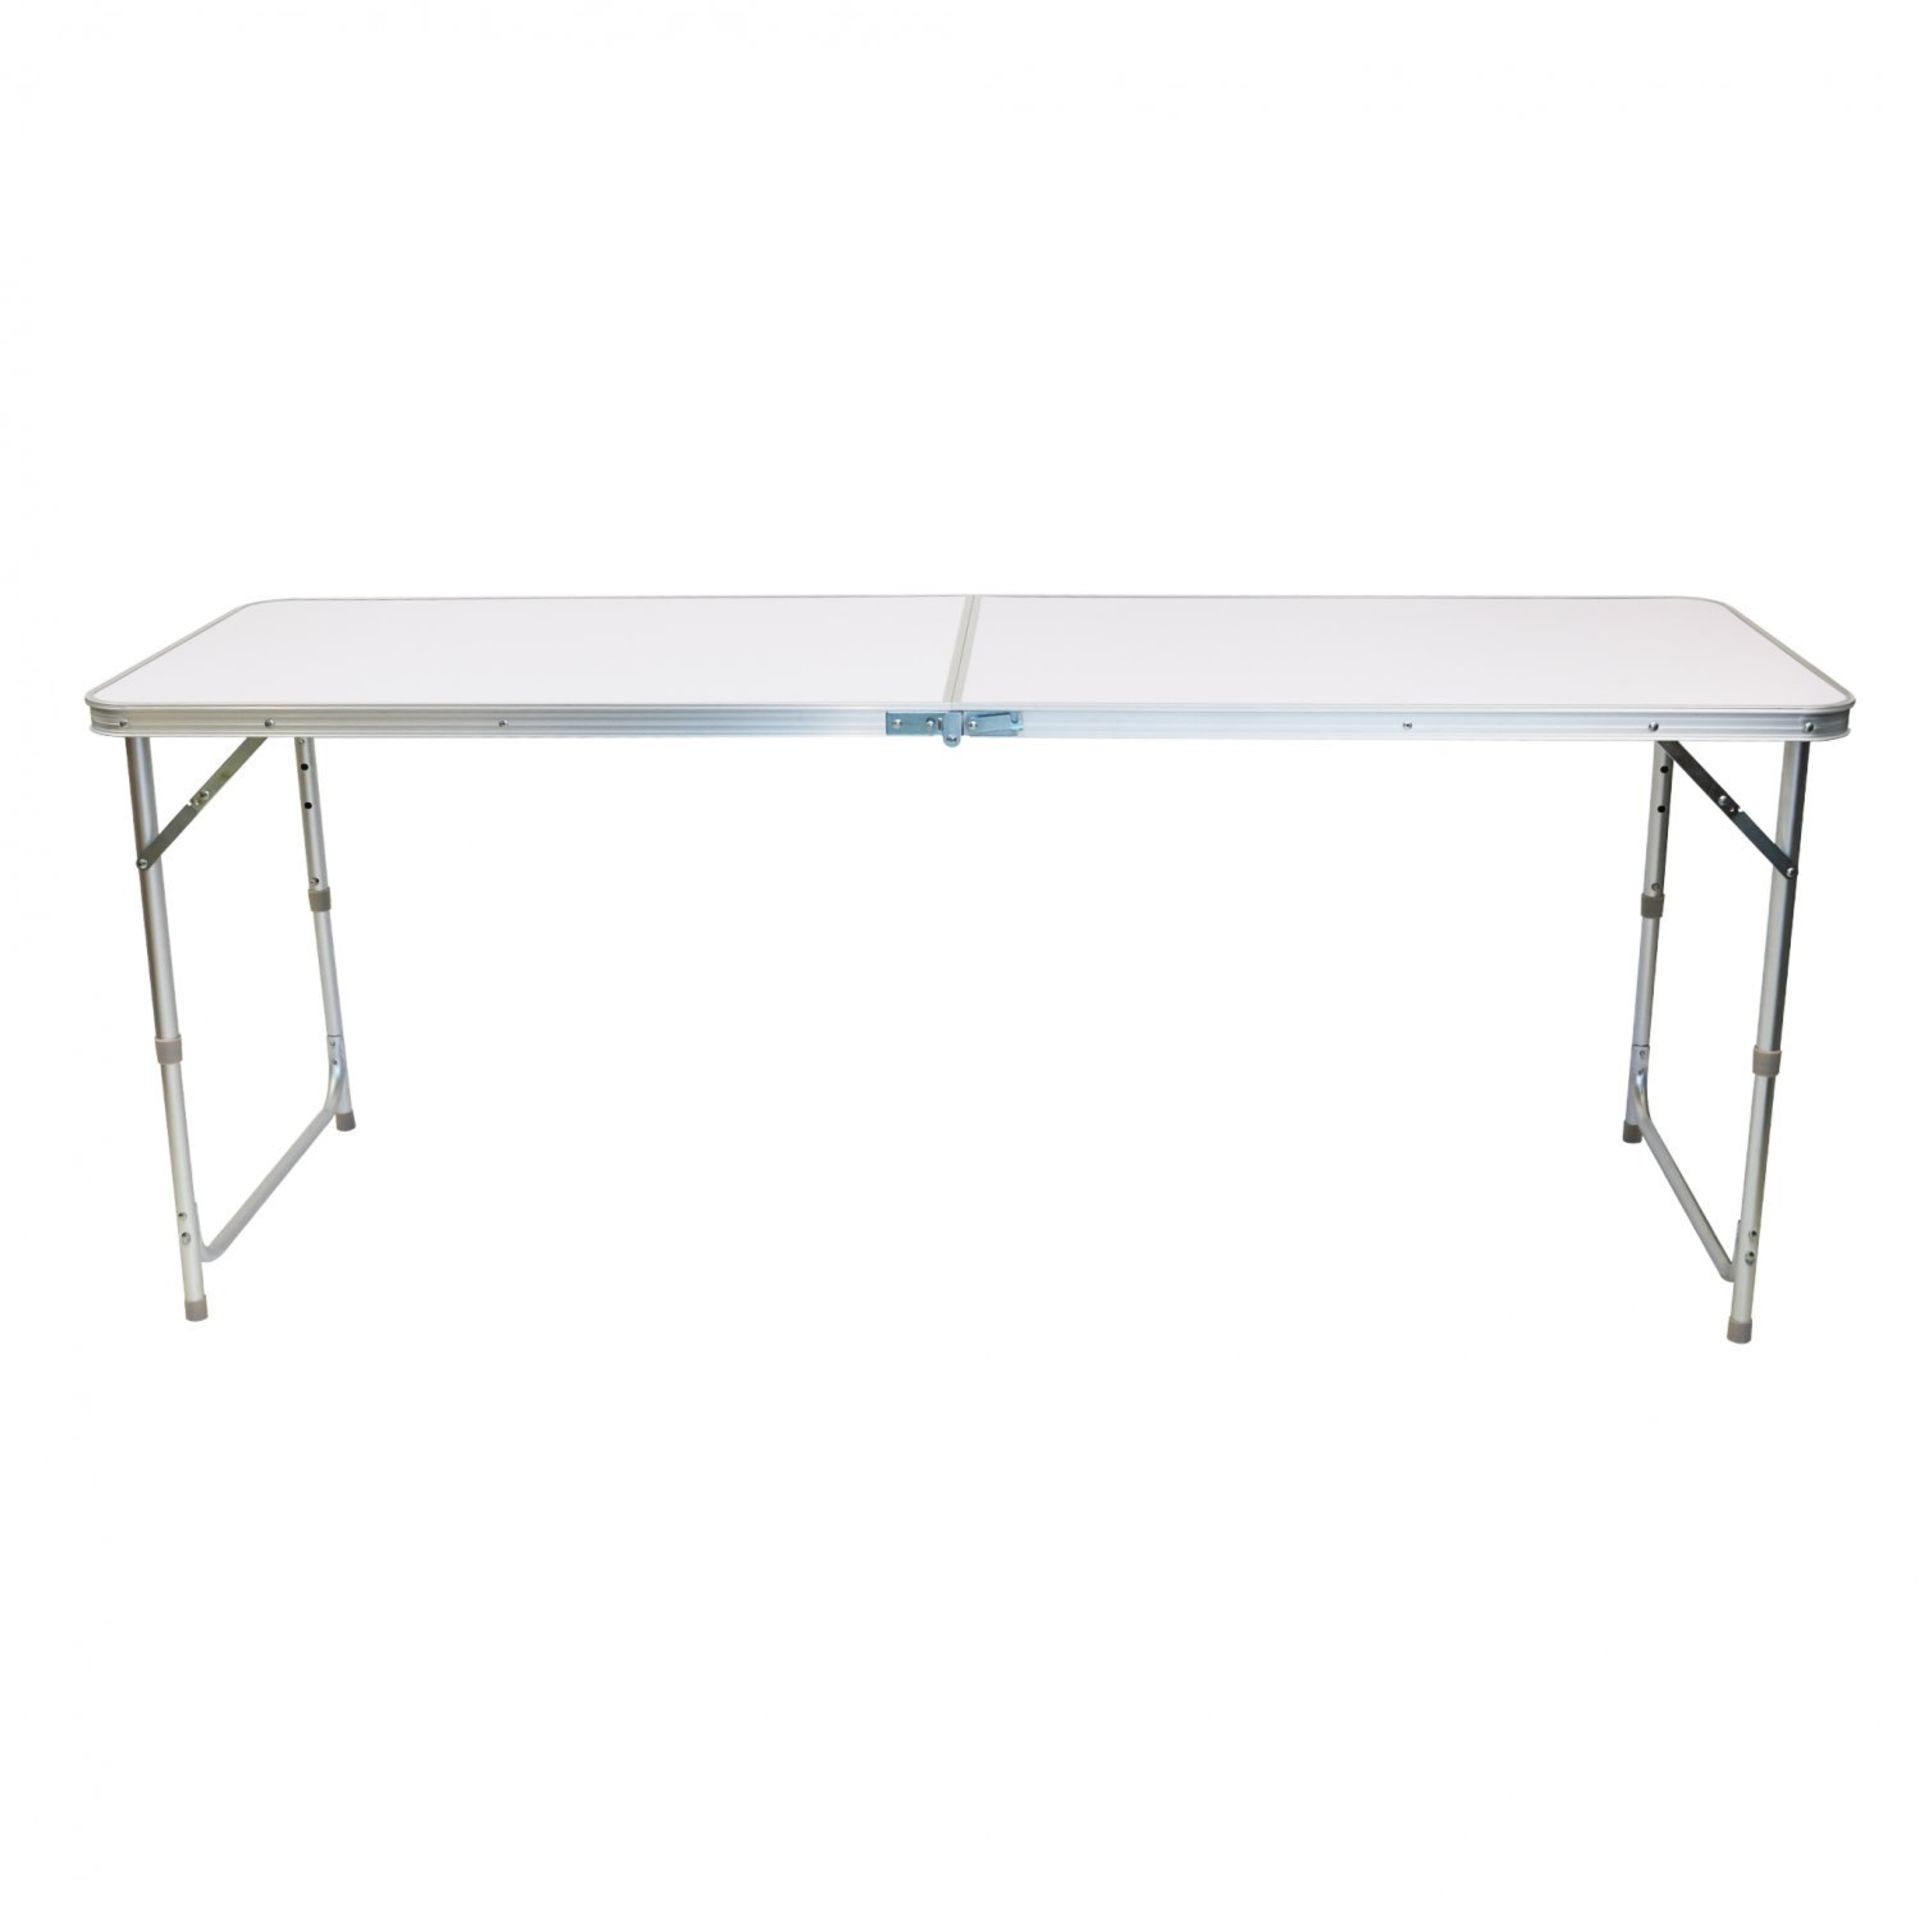 (LF44) 6ft Folding Outdoor Camping Kitchen Work Top Table The aluminium folding picnic table... - Image 2 of 2